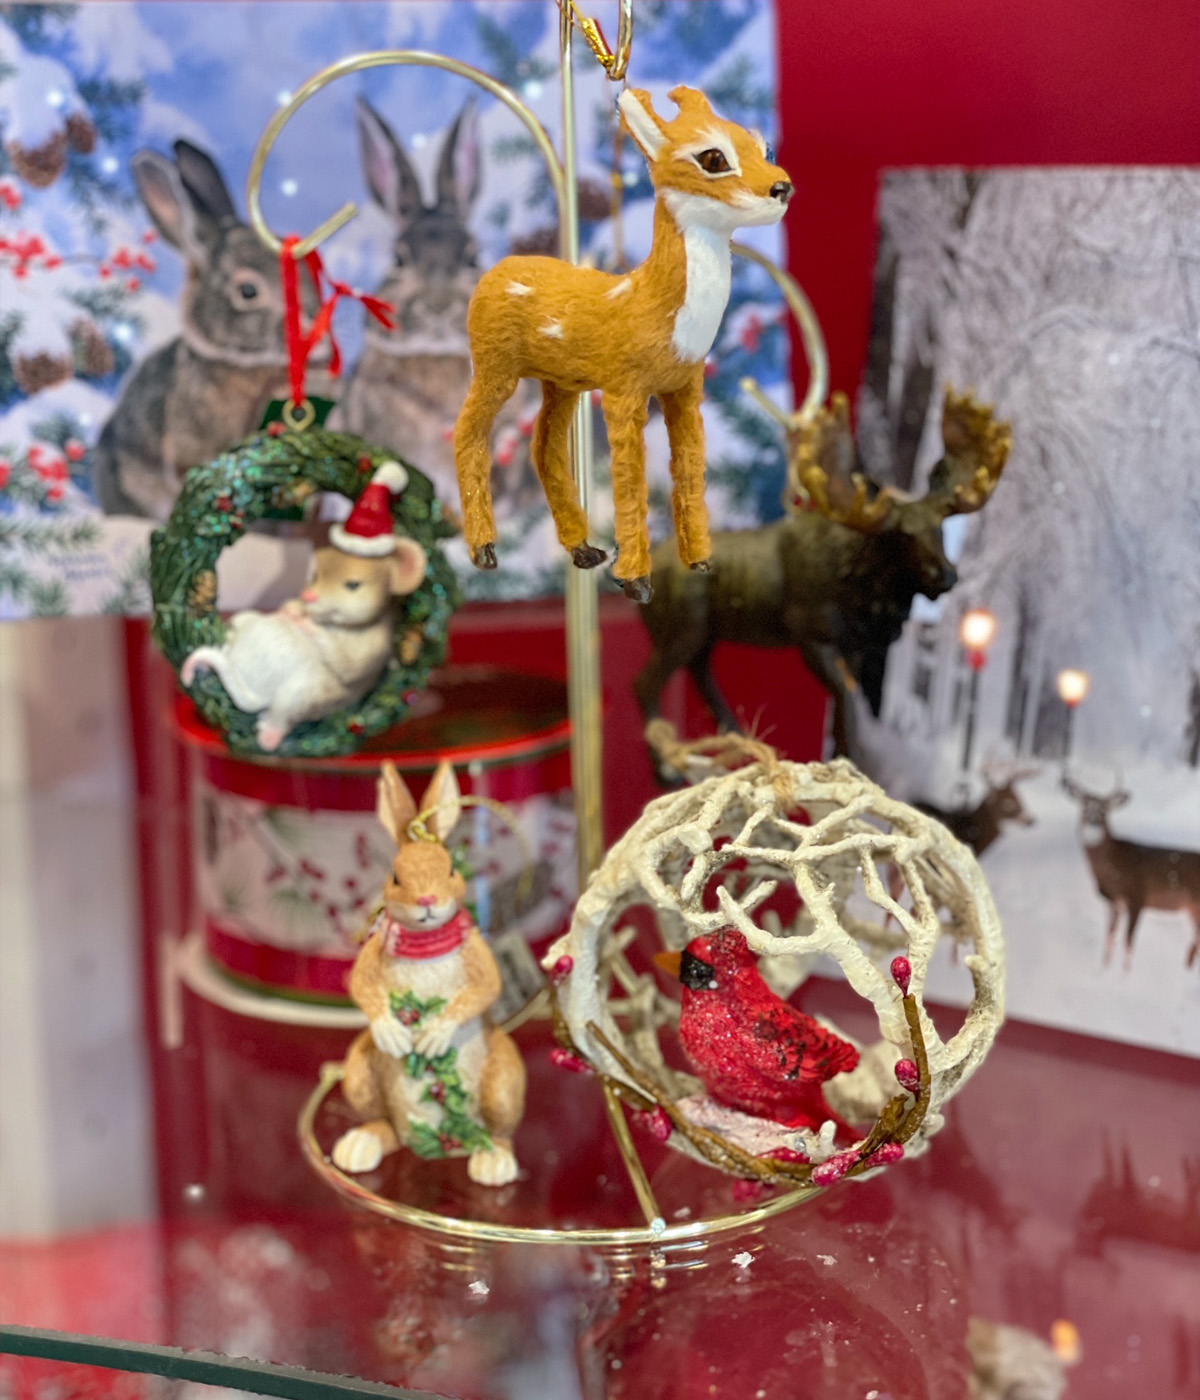 Forest animal ornaments of a rabbit, mouse, deer